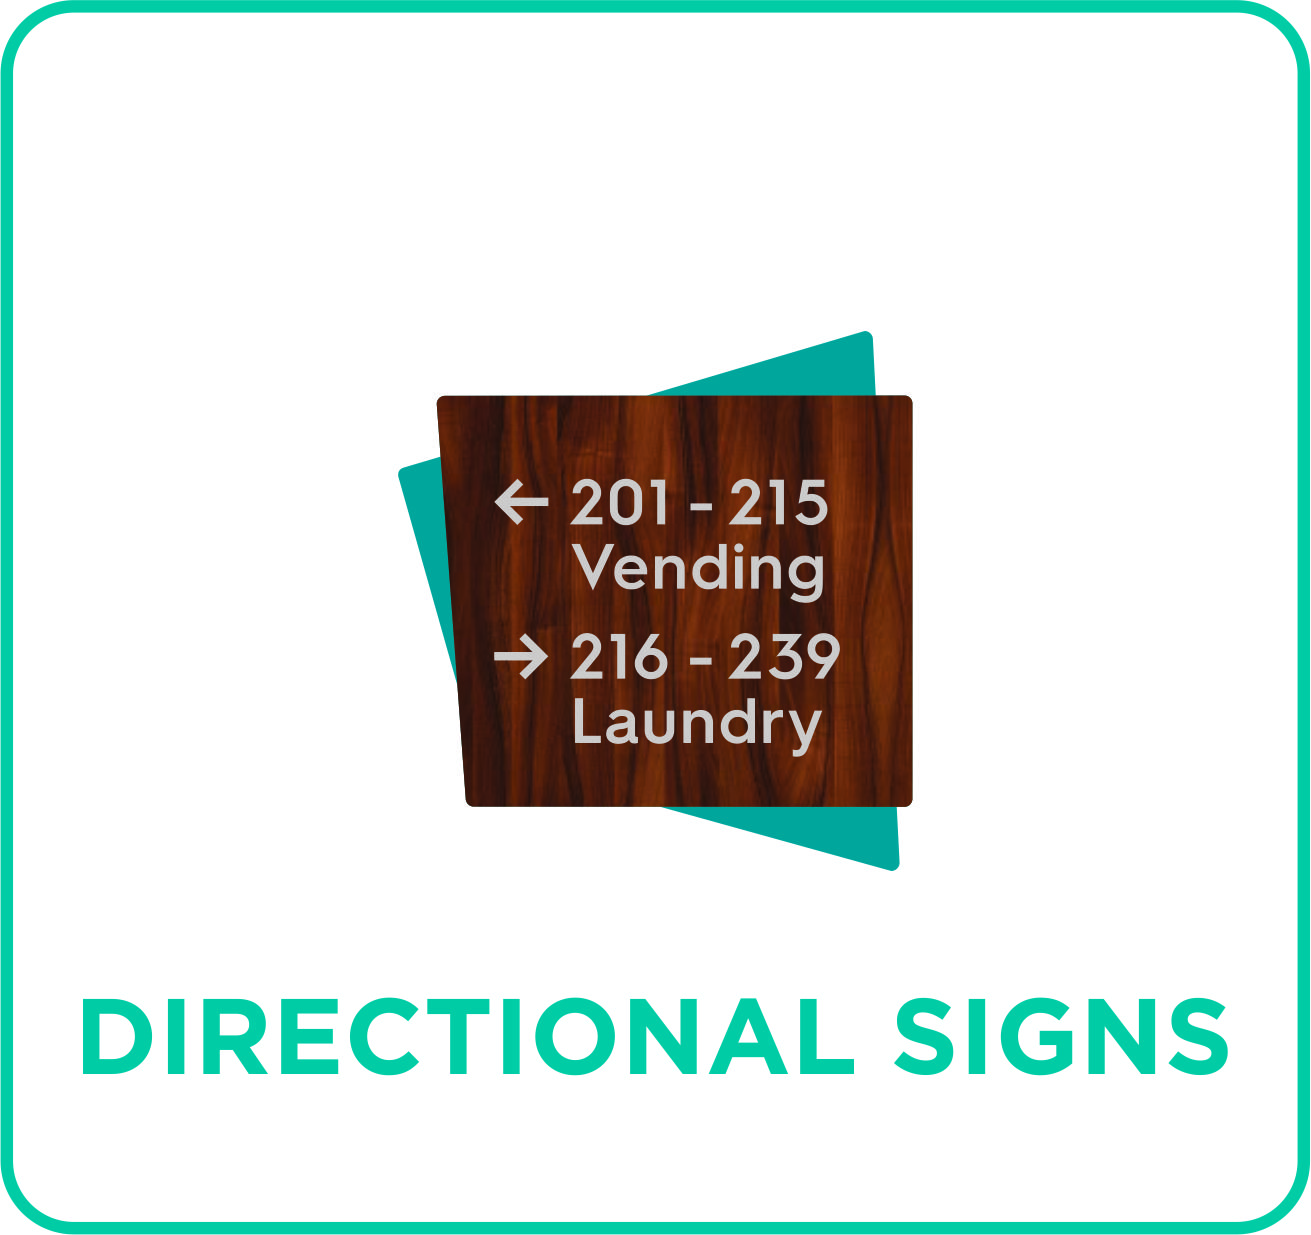 Signature Inn - Directional Signs